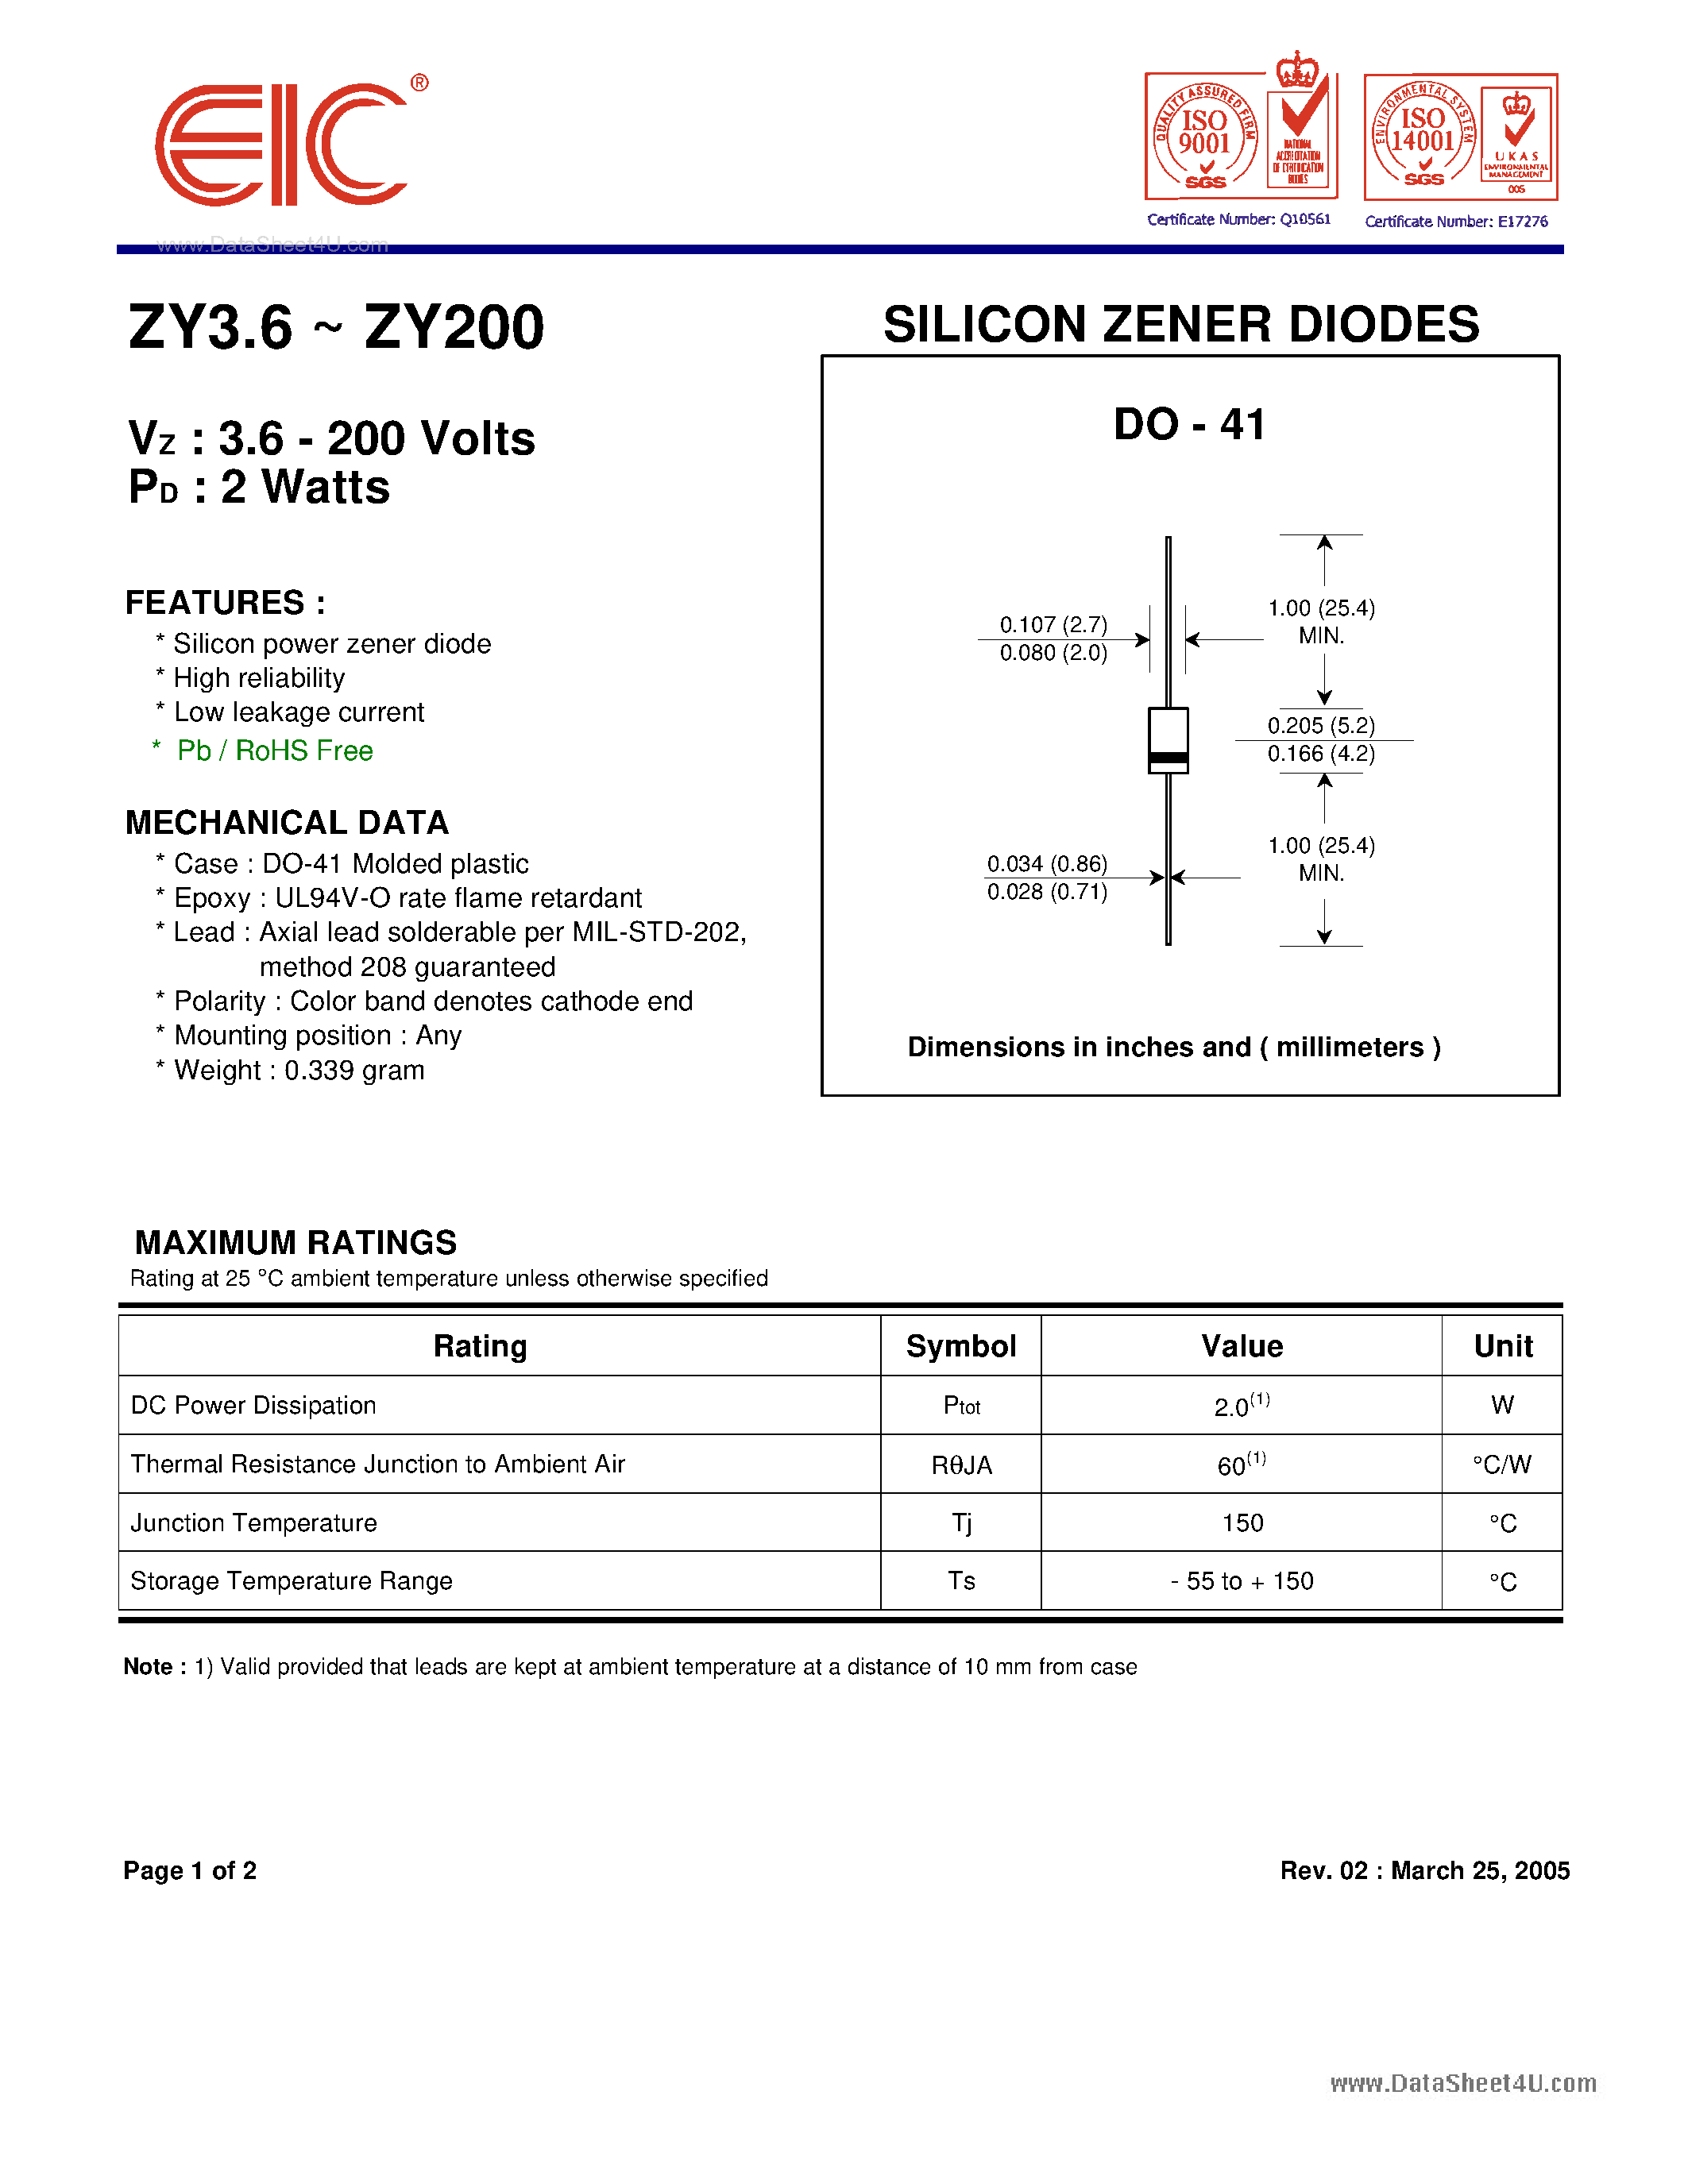 Даташит ZY7.5 - SILICON ZENER DIODES страница 1